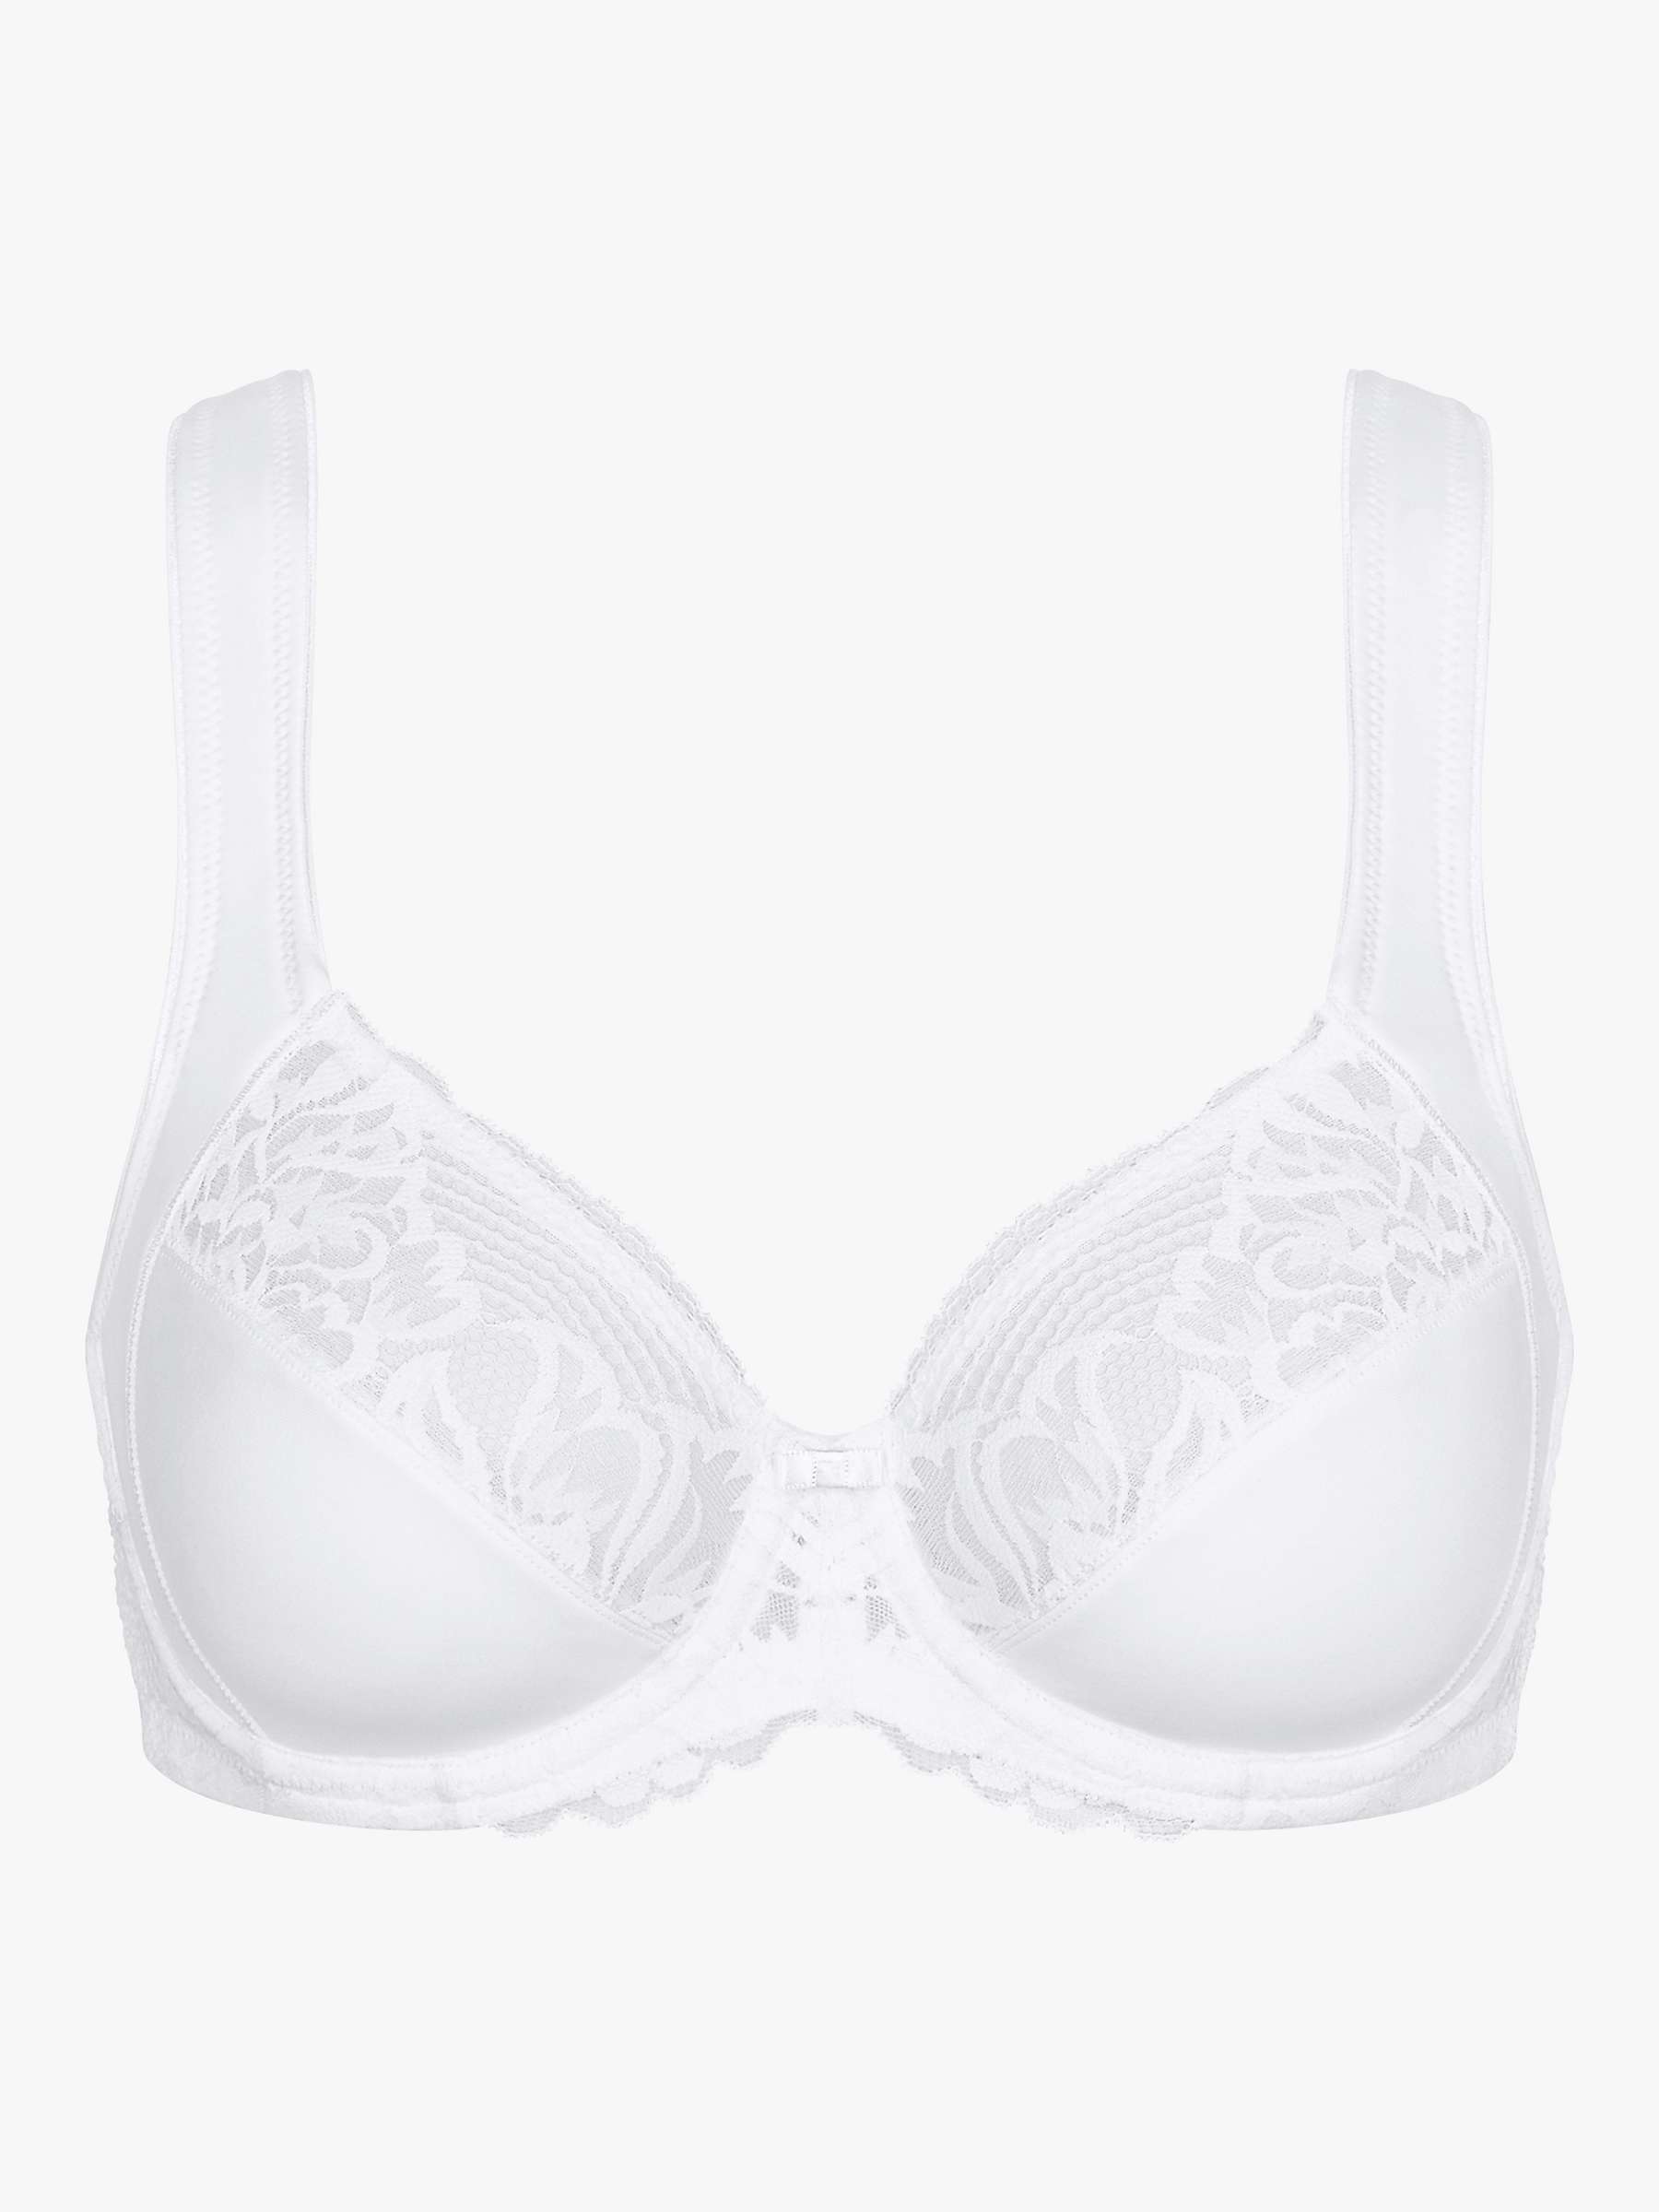 Buy Triumph Modern Lace & Cotton Full Cup Bra Online at johnlewis.com